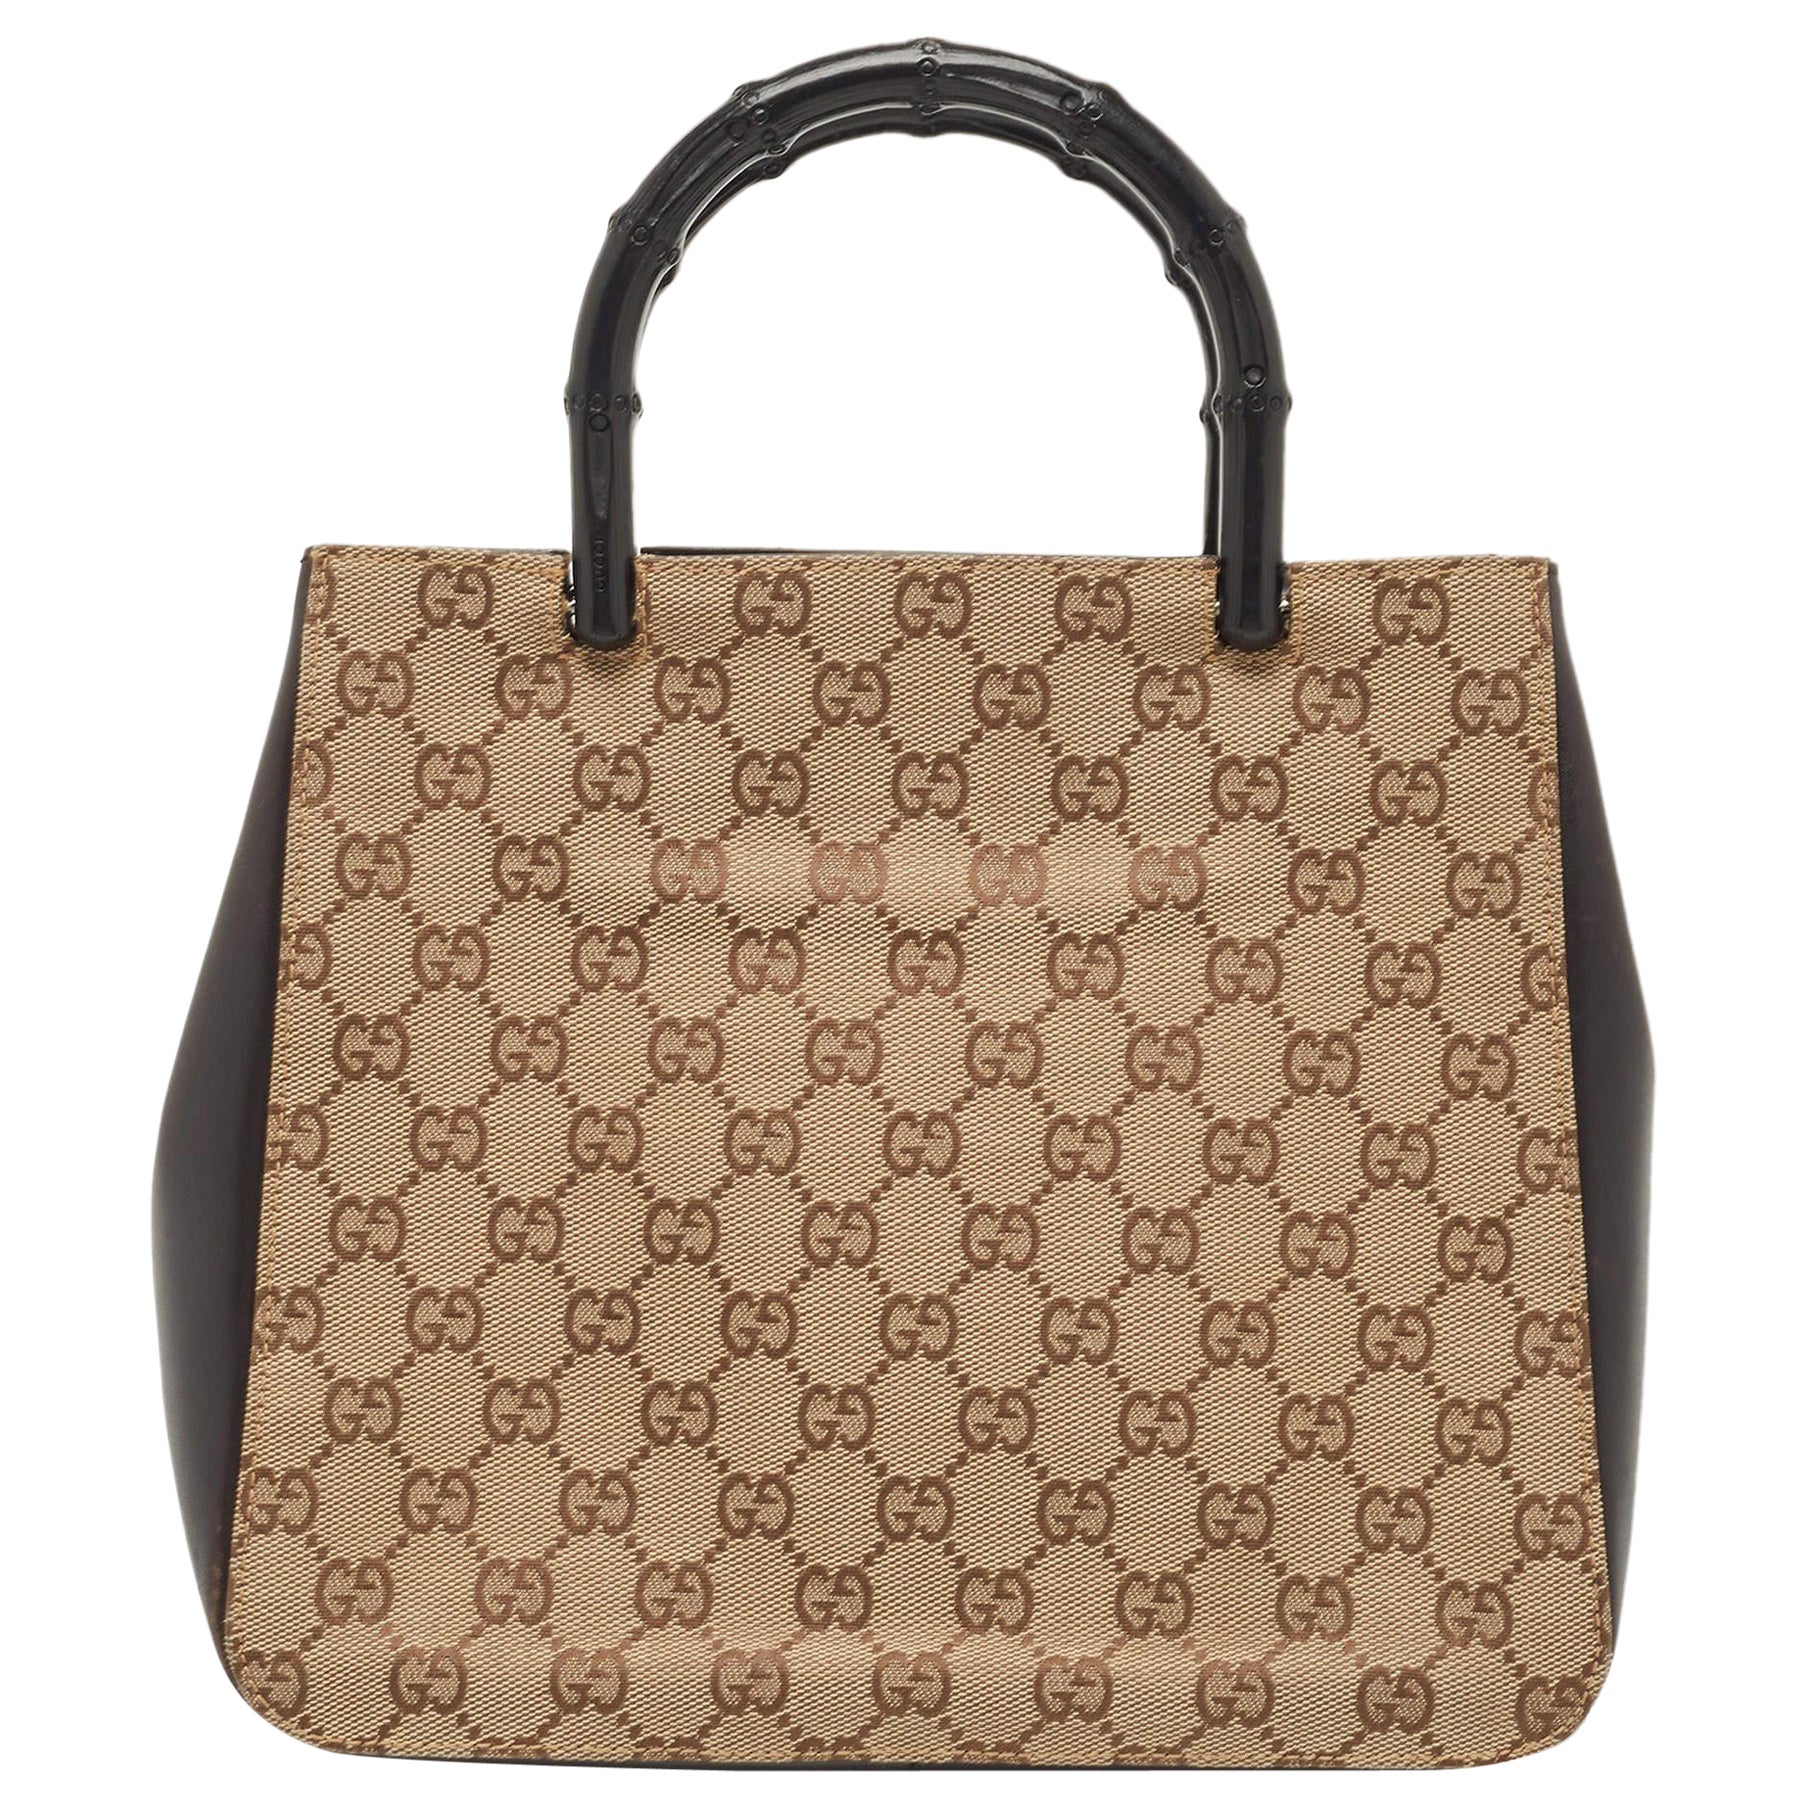 Gucci Beige/Brown Canvas And Leather Bamboo Handle Tote